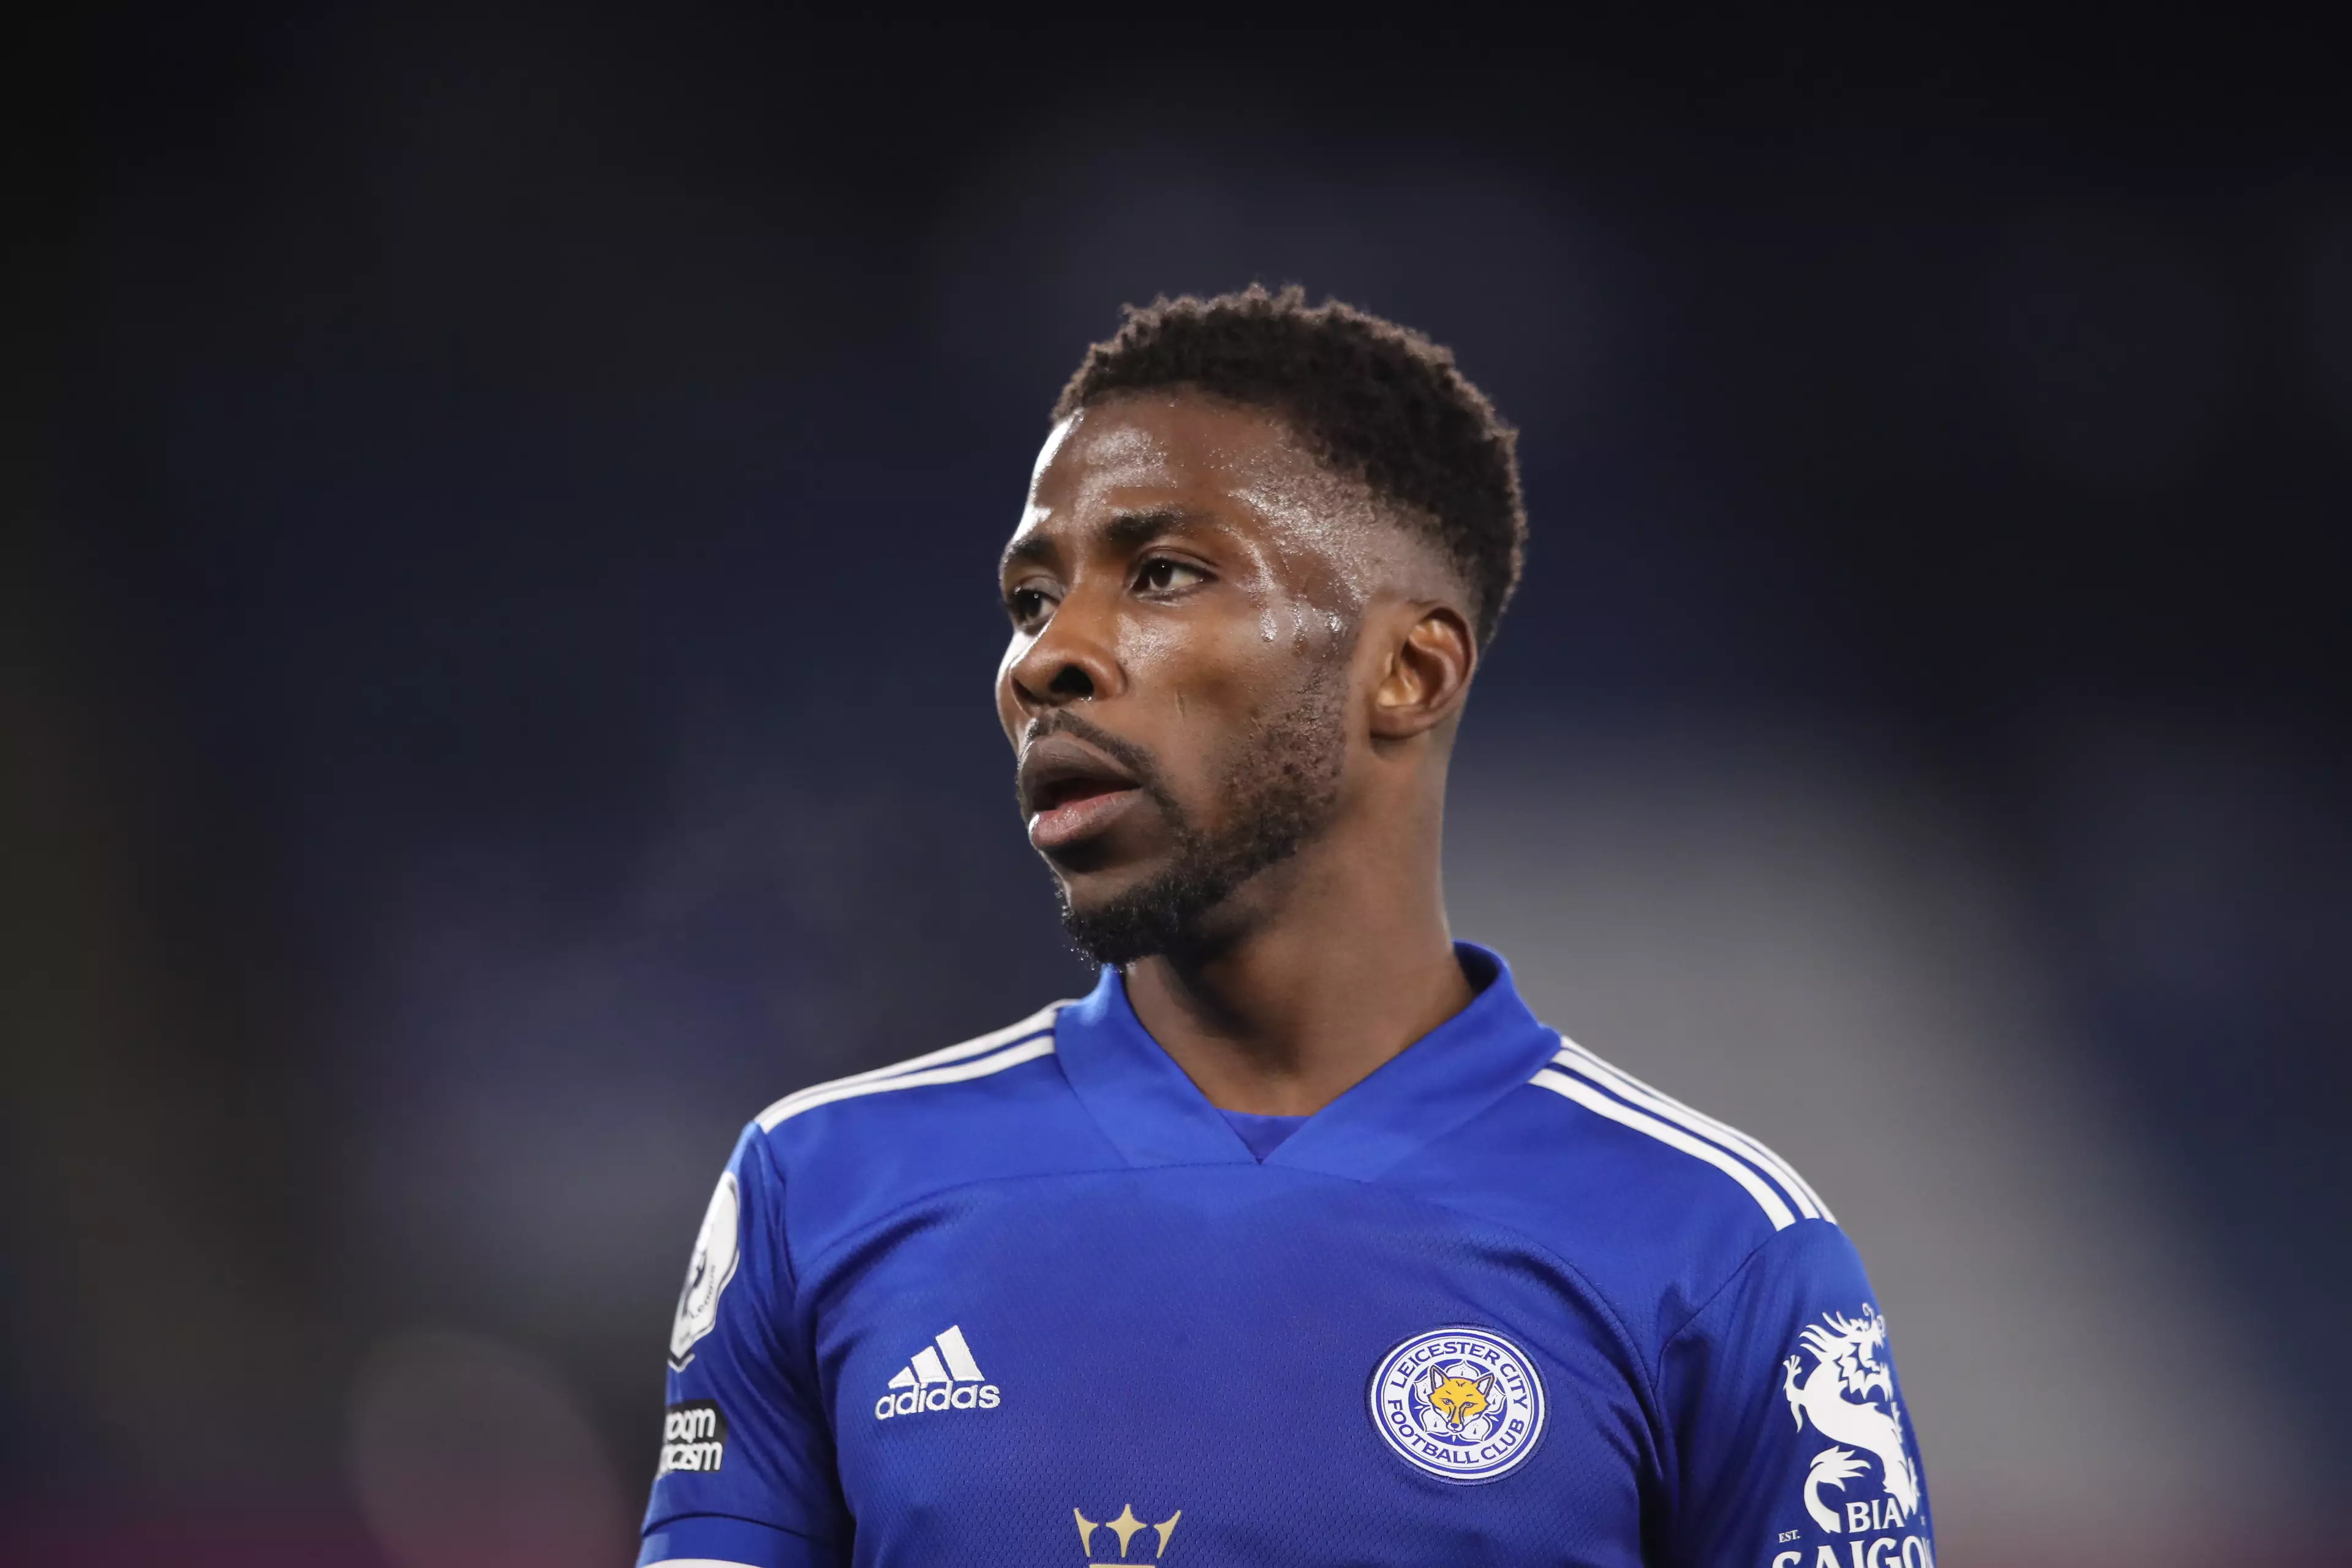 Kelechi Iheanacho has been in hot form for Leicester City this season